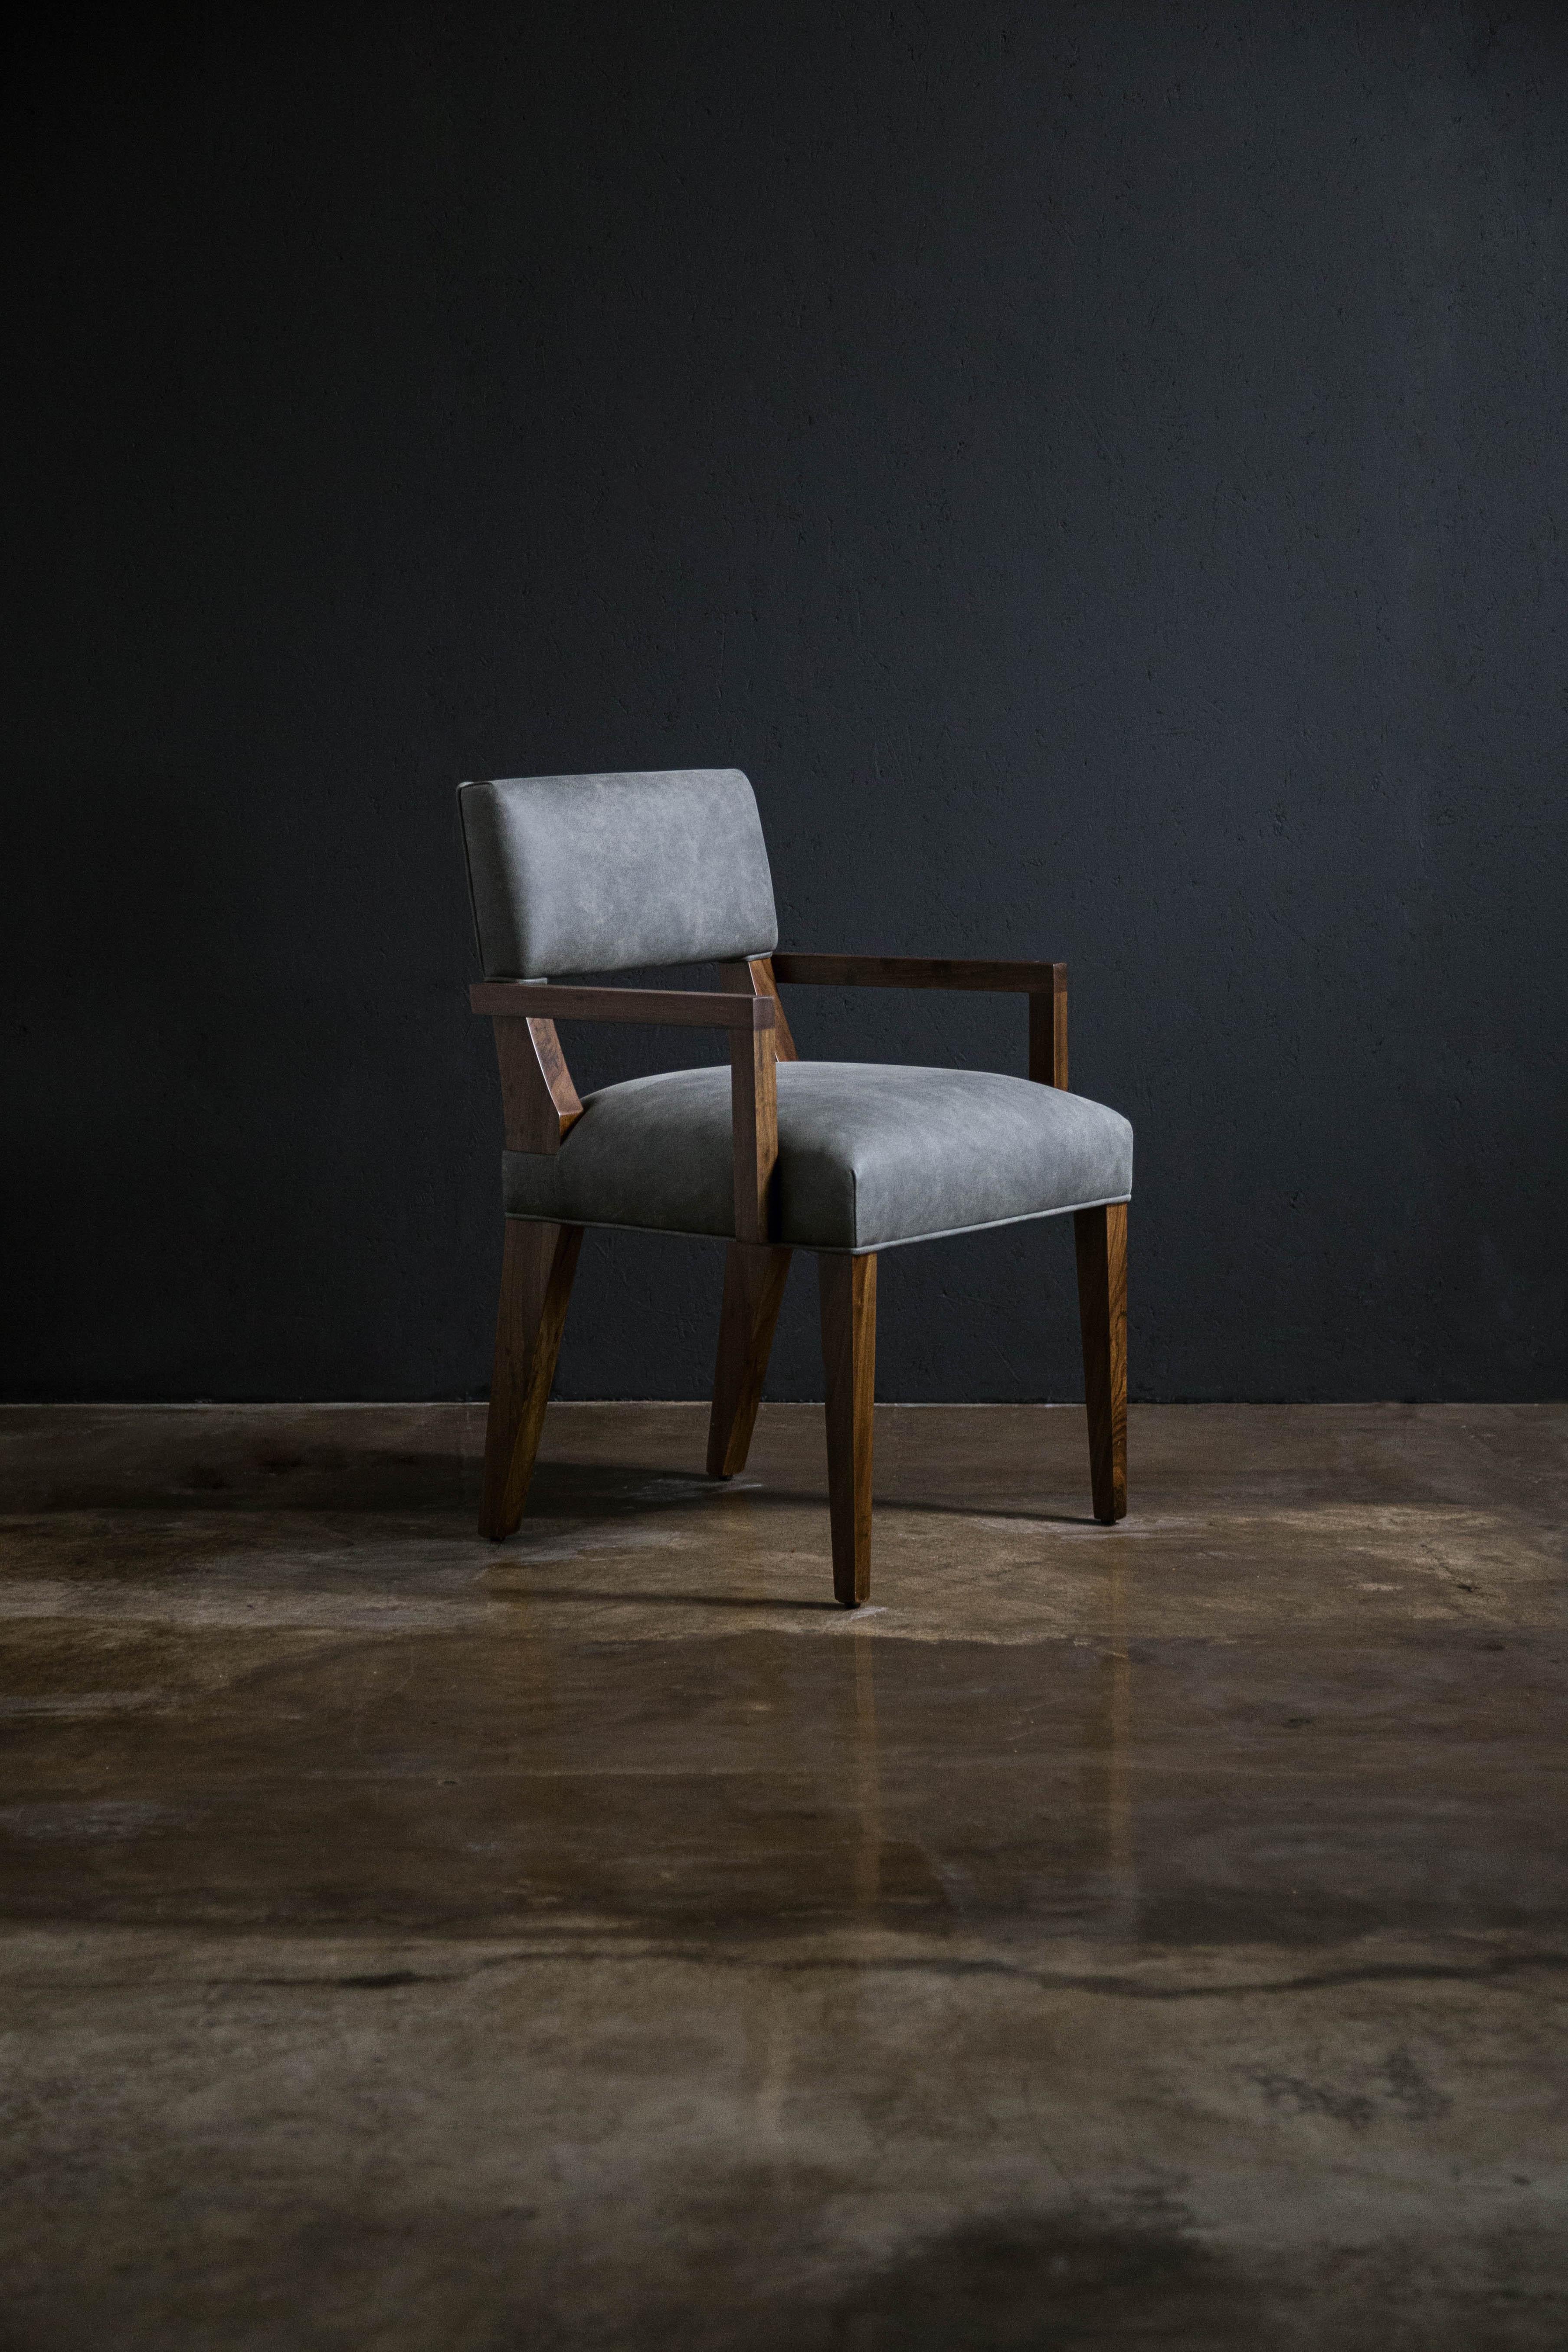 Bruno Modern Low Armchair in Argentine Rosewood & Leather or COM/COL by Costantini

Measurements are 23